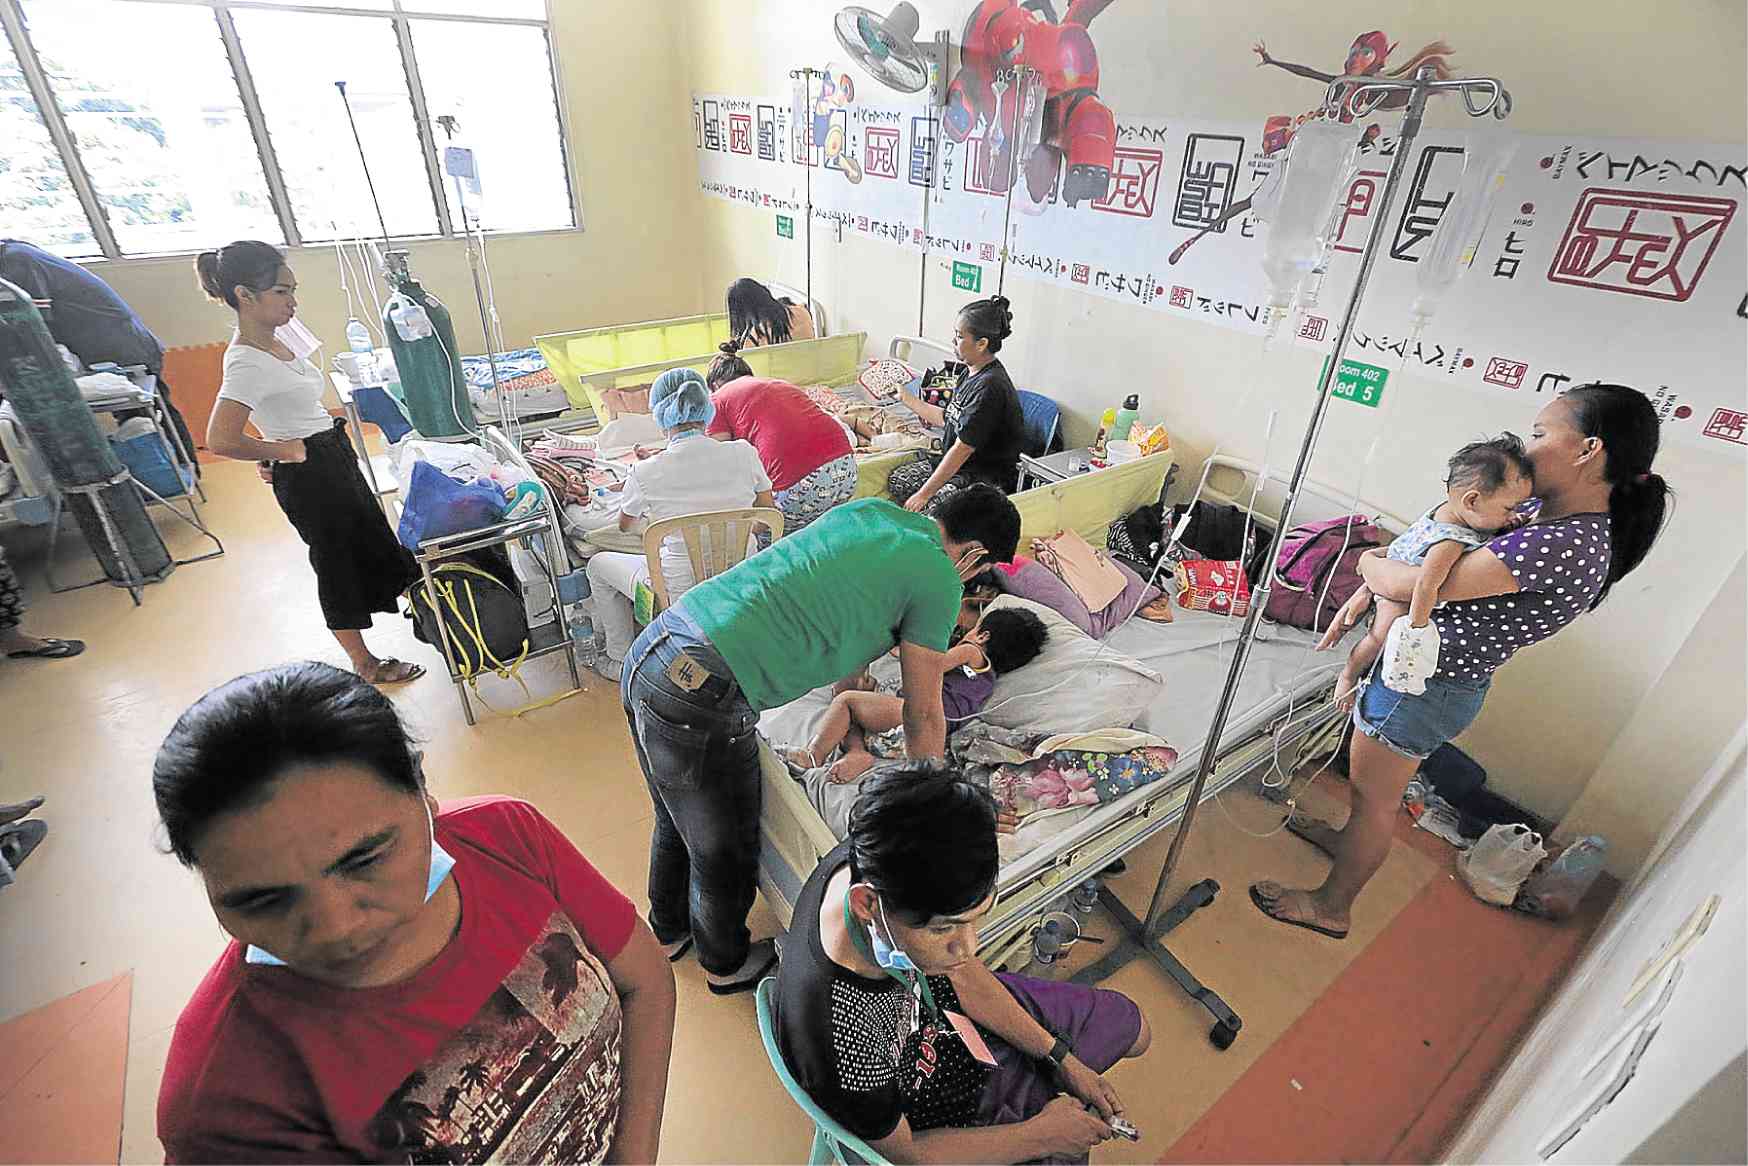 DOH: Over 4K measles cases, 70 deaths in Philippines